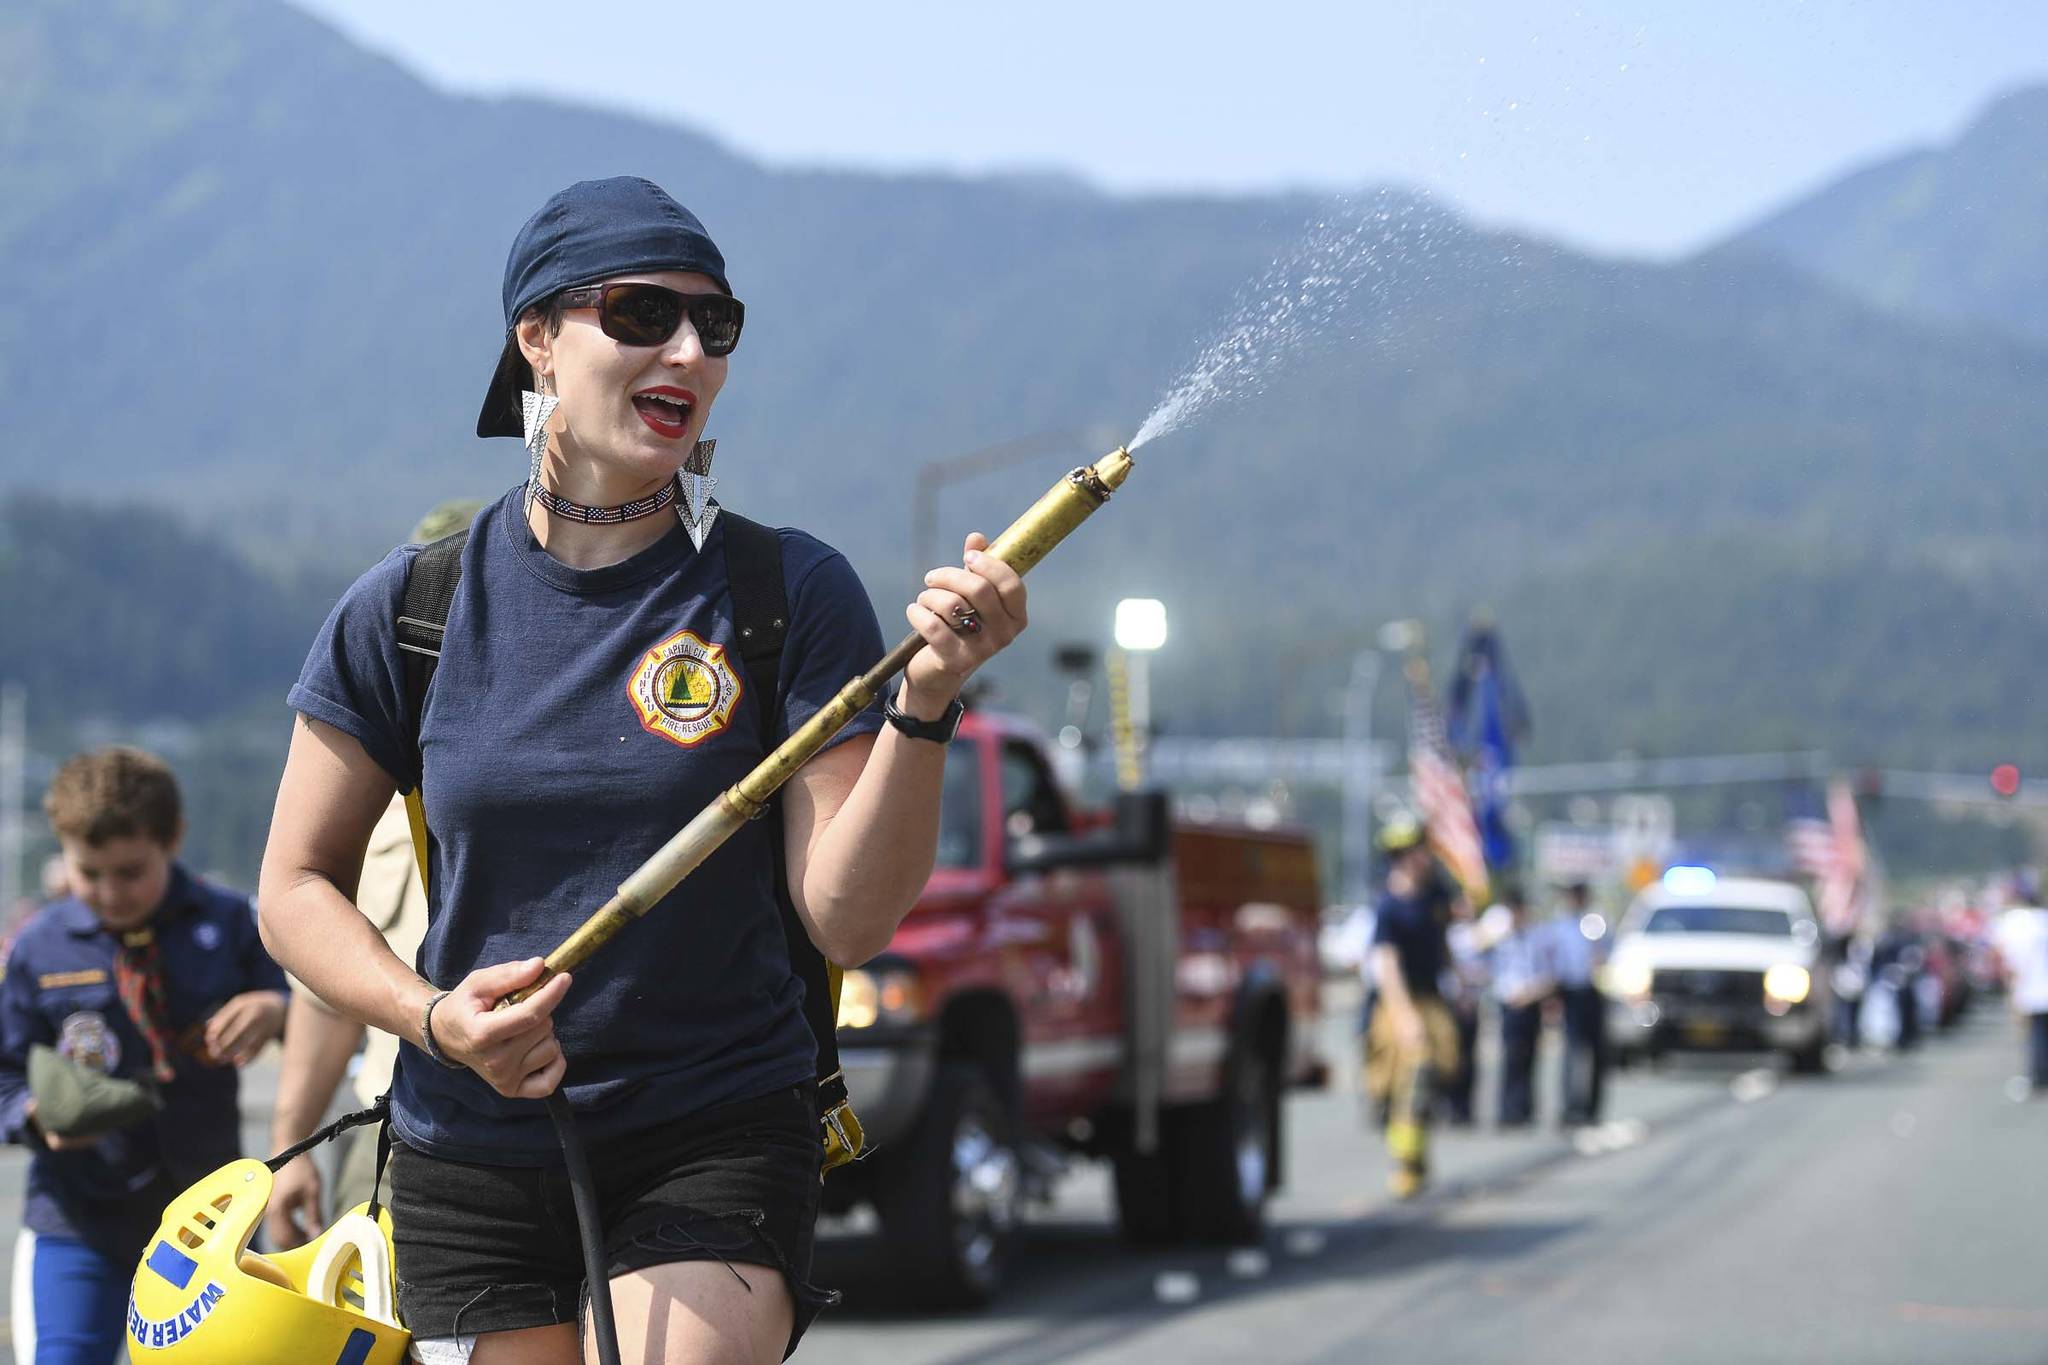 Meghan DeSloover of Capital City Fire/Rescue keeps poeple cool during the Juneau Fourth of July Parade on Thursday, July 4, 2019. (Michael Penn | Juneau Empire)